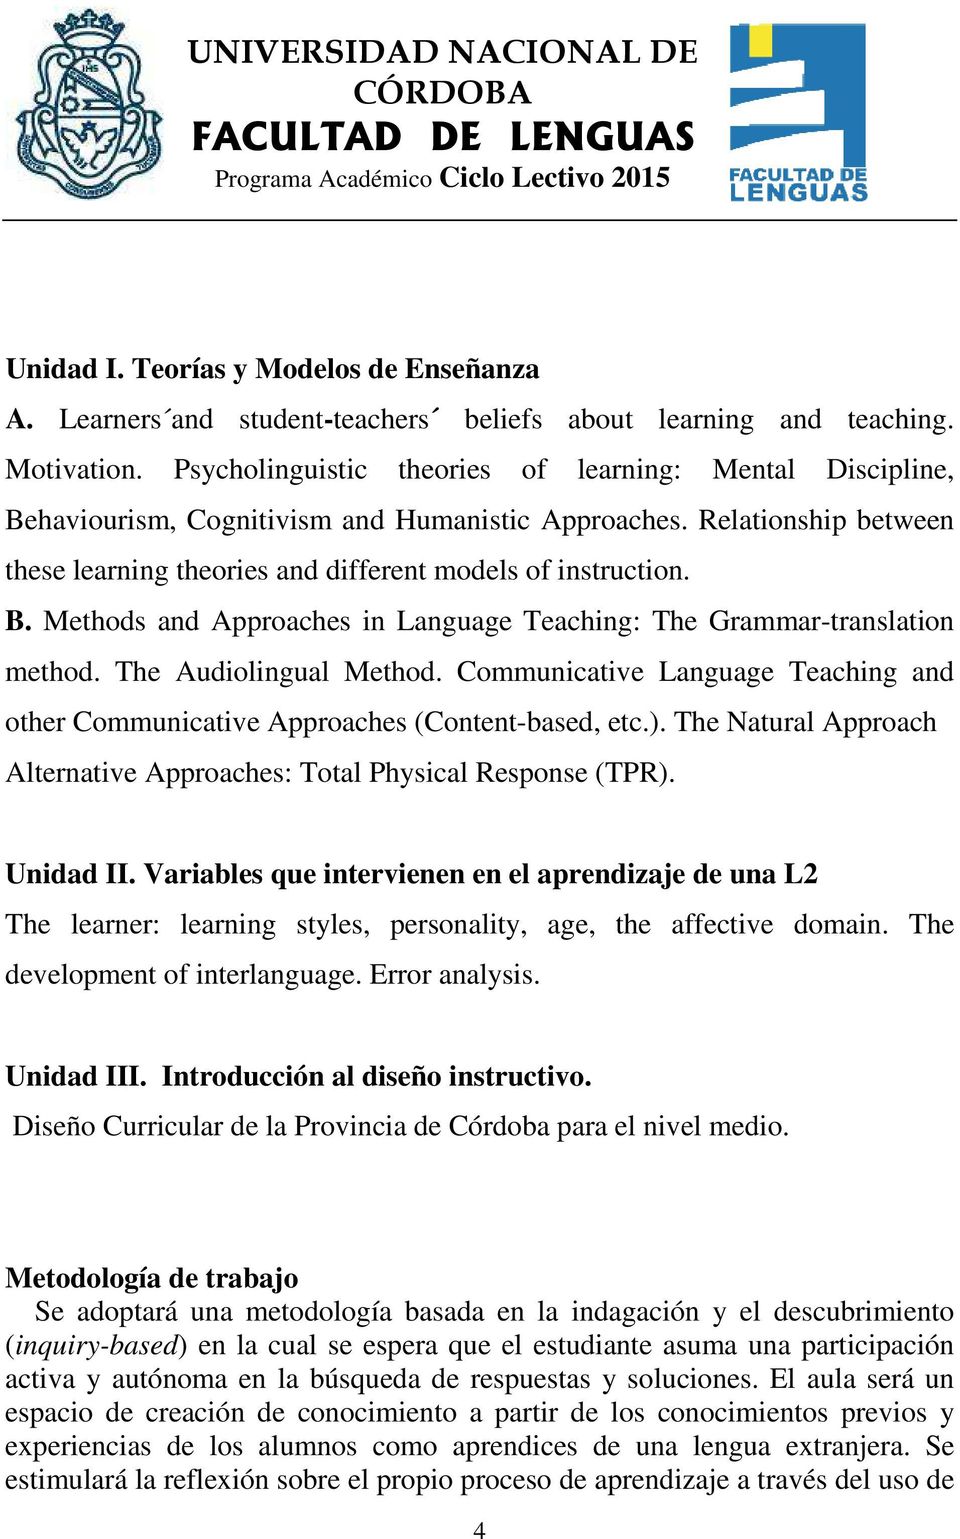 The Audiolingual Method. Communicative Language Teaching and other Communicative Approaches (Content-based, etc.). The Natural Approach Alternative Approaches: Total Physical Response (TPR).